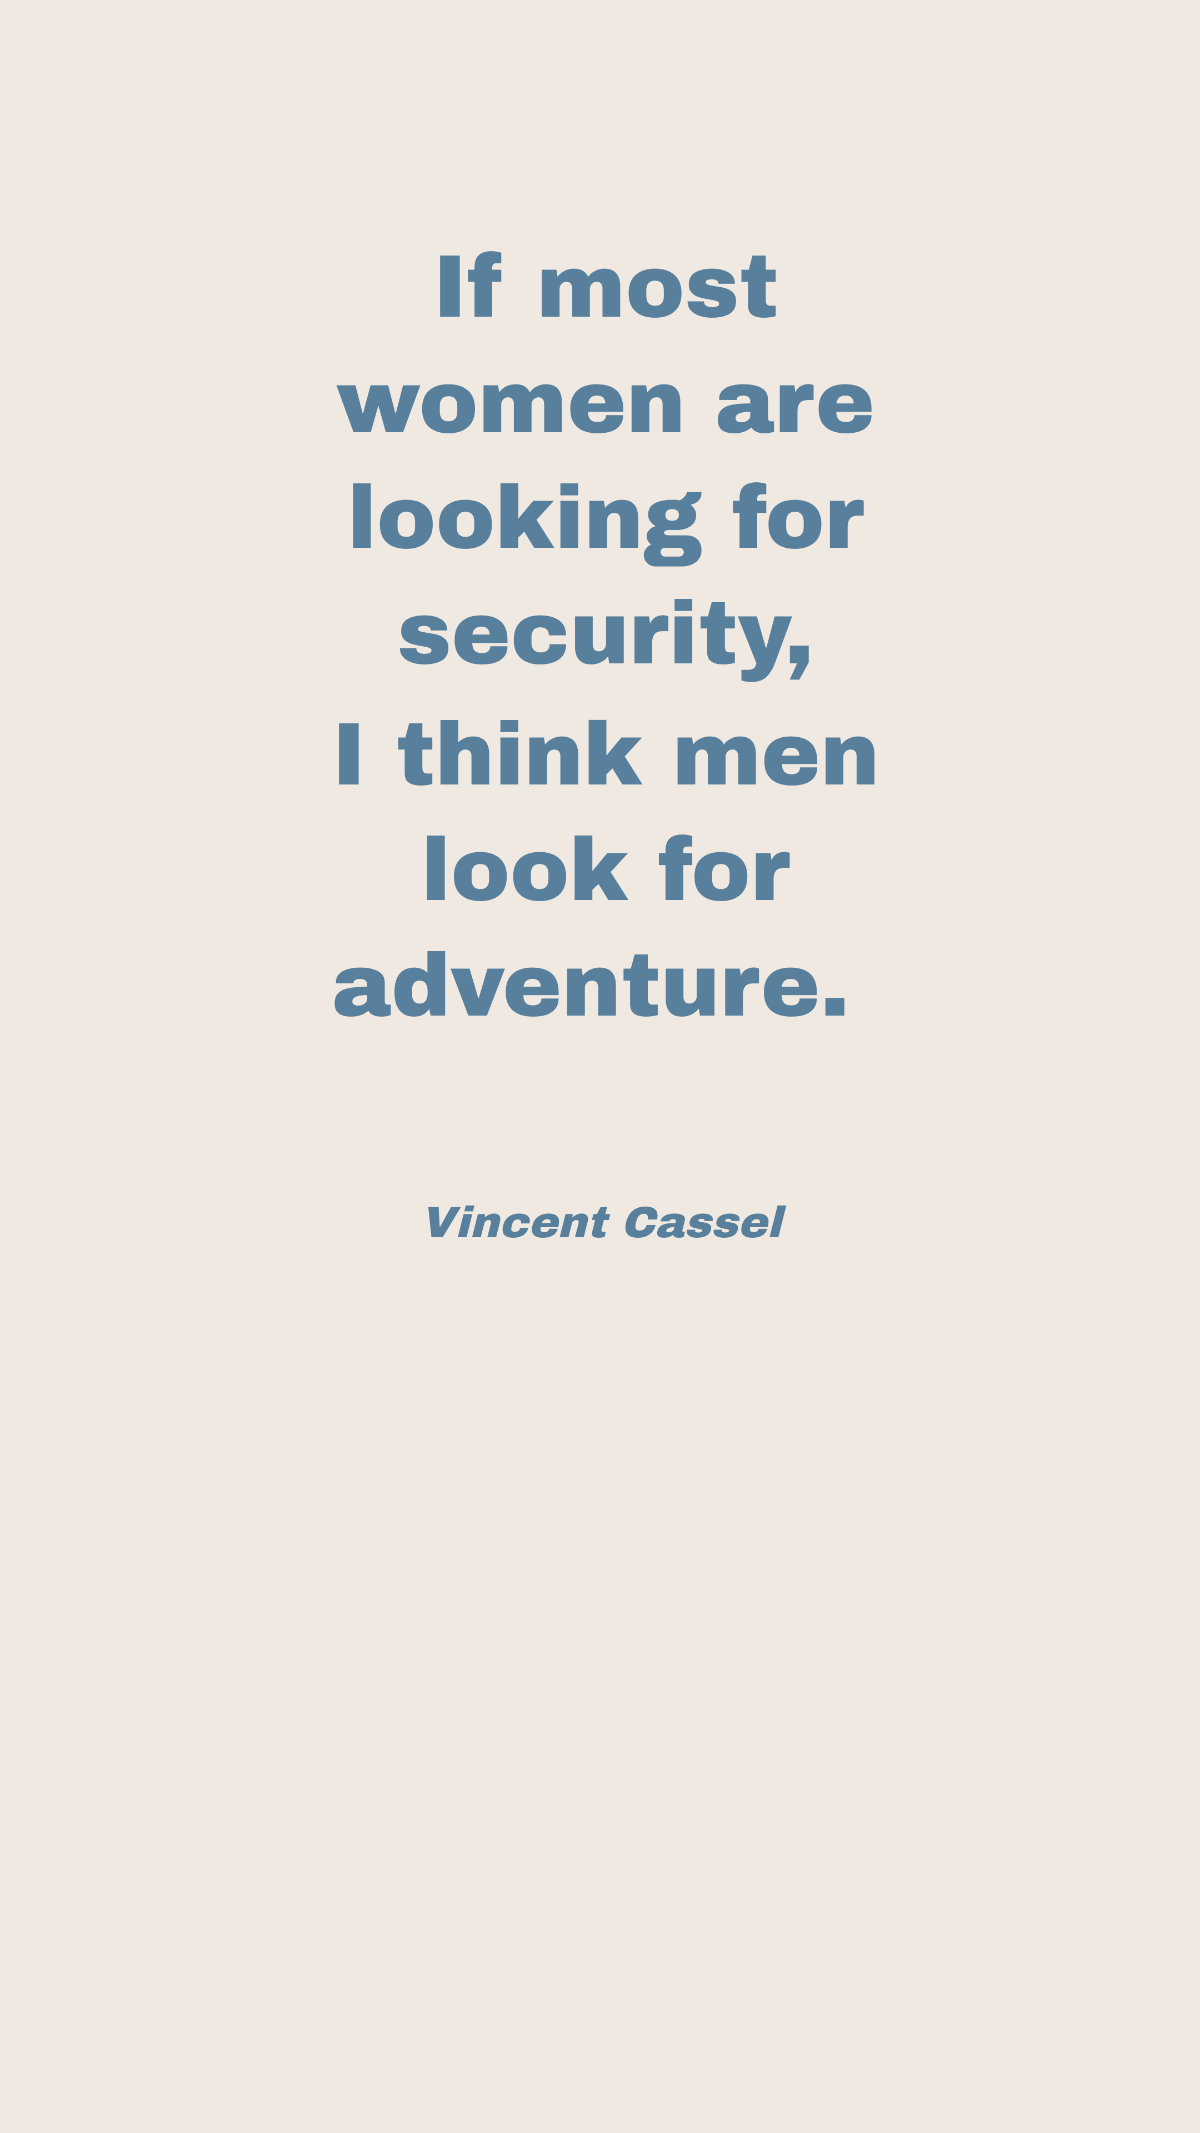 Free Vincent Cassel - If most women are looking for security, I think men look for adventure. Template